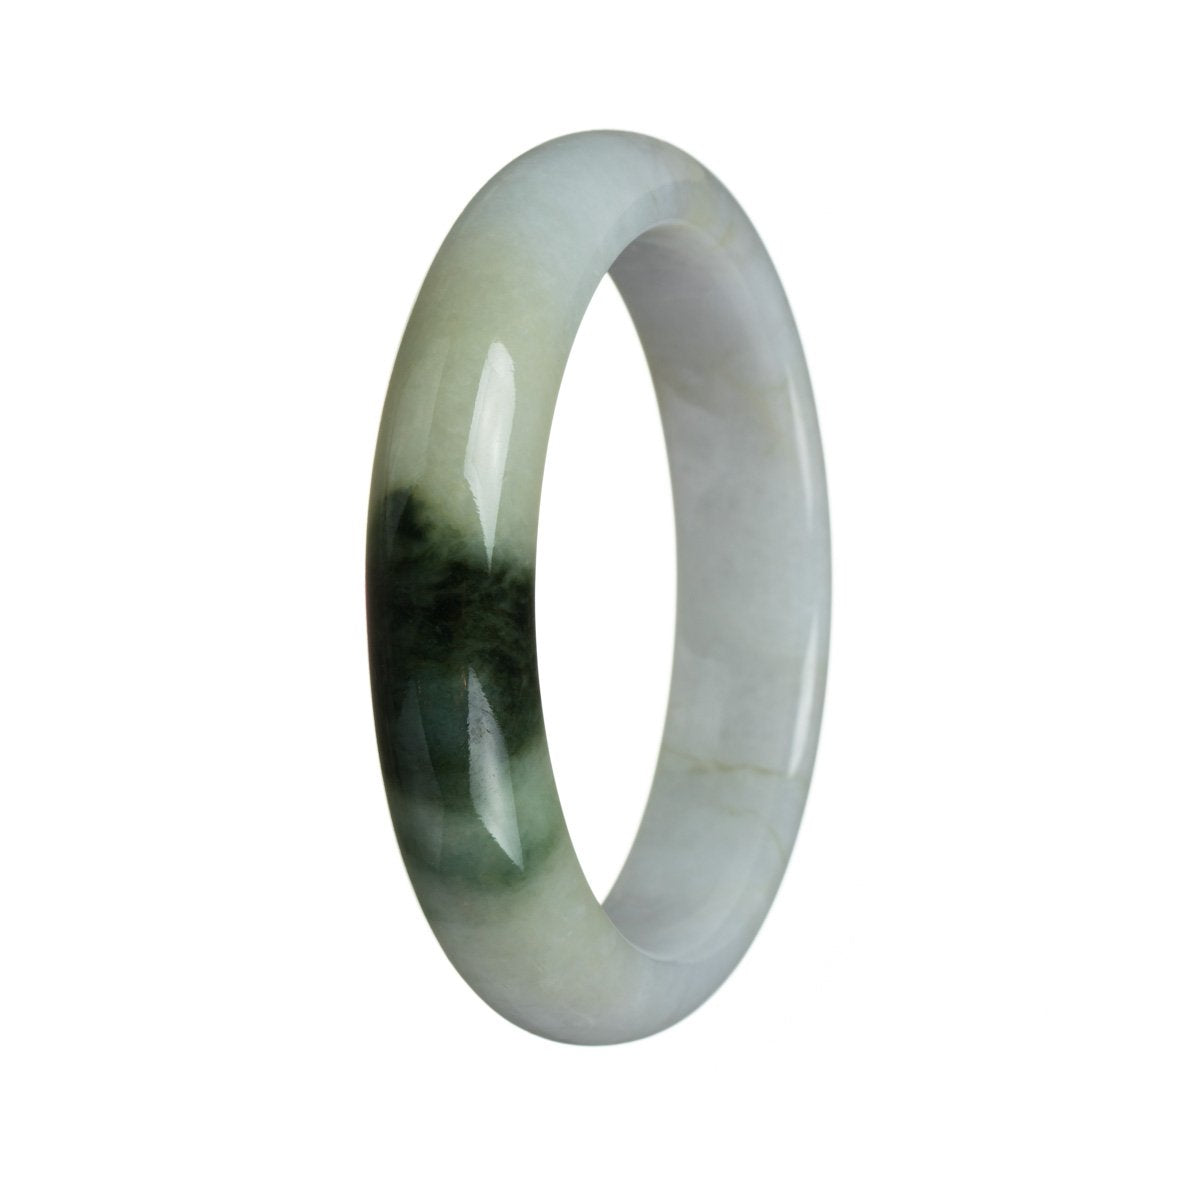 A close-up image of a beautiful white Burmese Jade bangle with intricate flower patterns carved into its surface. The bangle has a semi-round shape and measures 59mm in diameter. The high-quality jade reflects light, showcasing its natural beauty. This elegant piece of jewelry is from the MAYS™ collection.